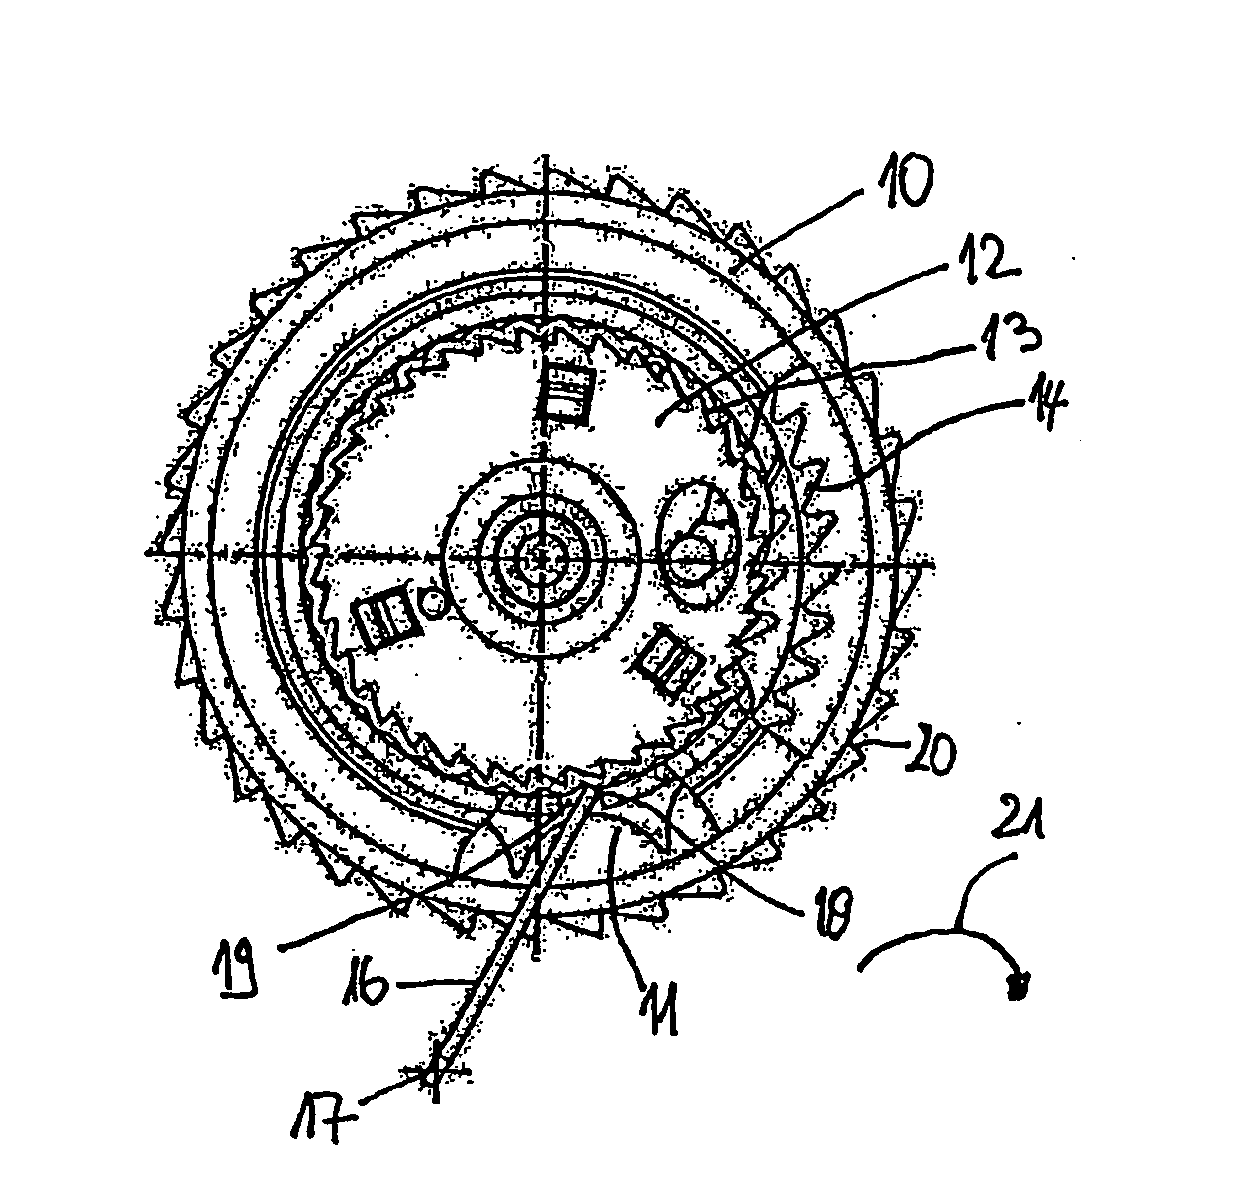 Coupling System Between Pre-Tensioning Wheel and Seat Belt Retainer Spool